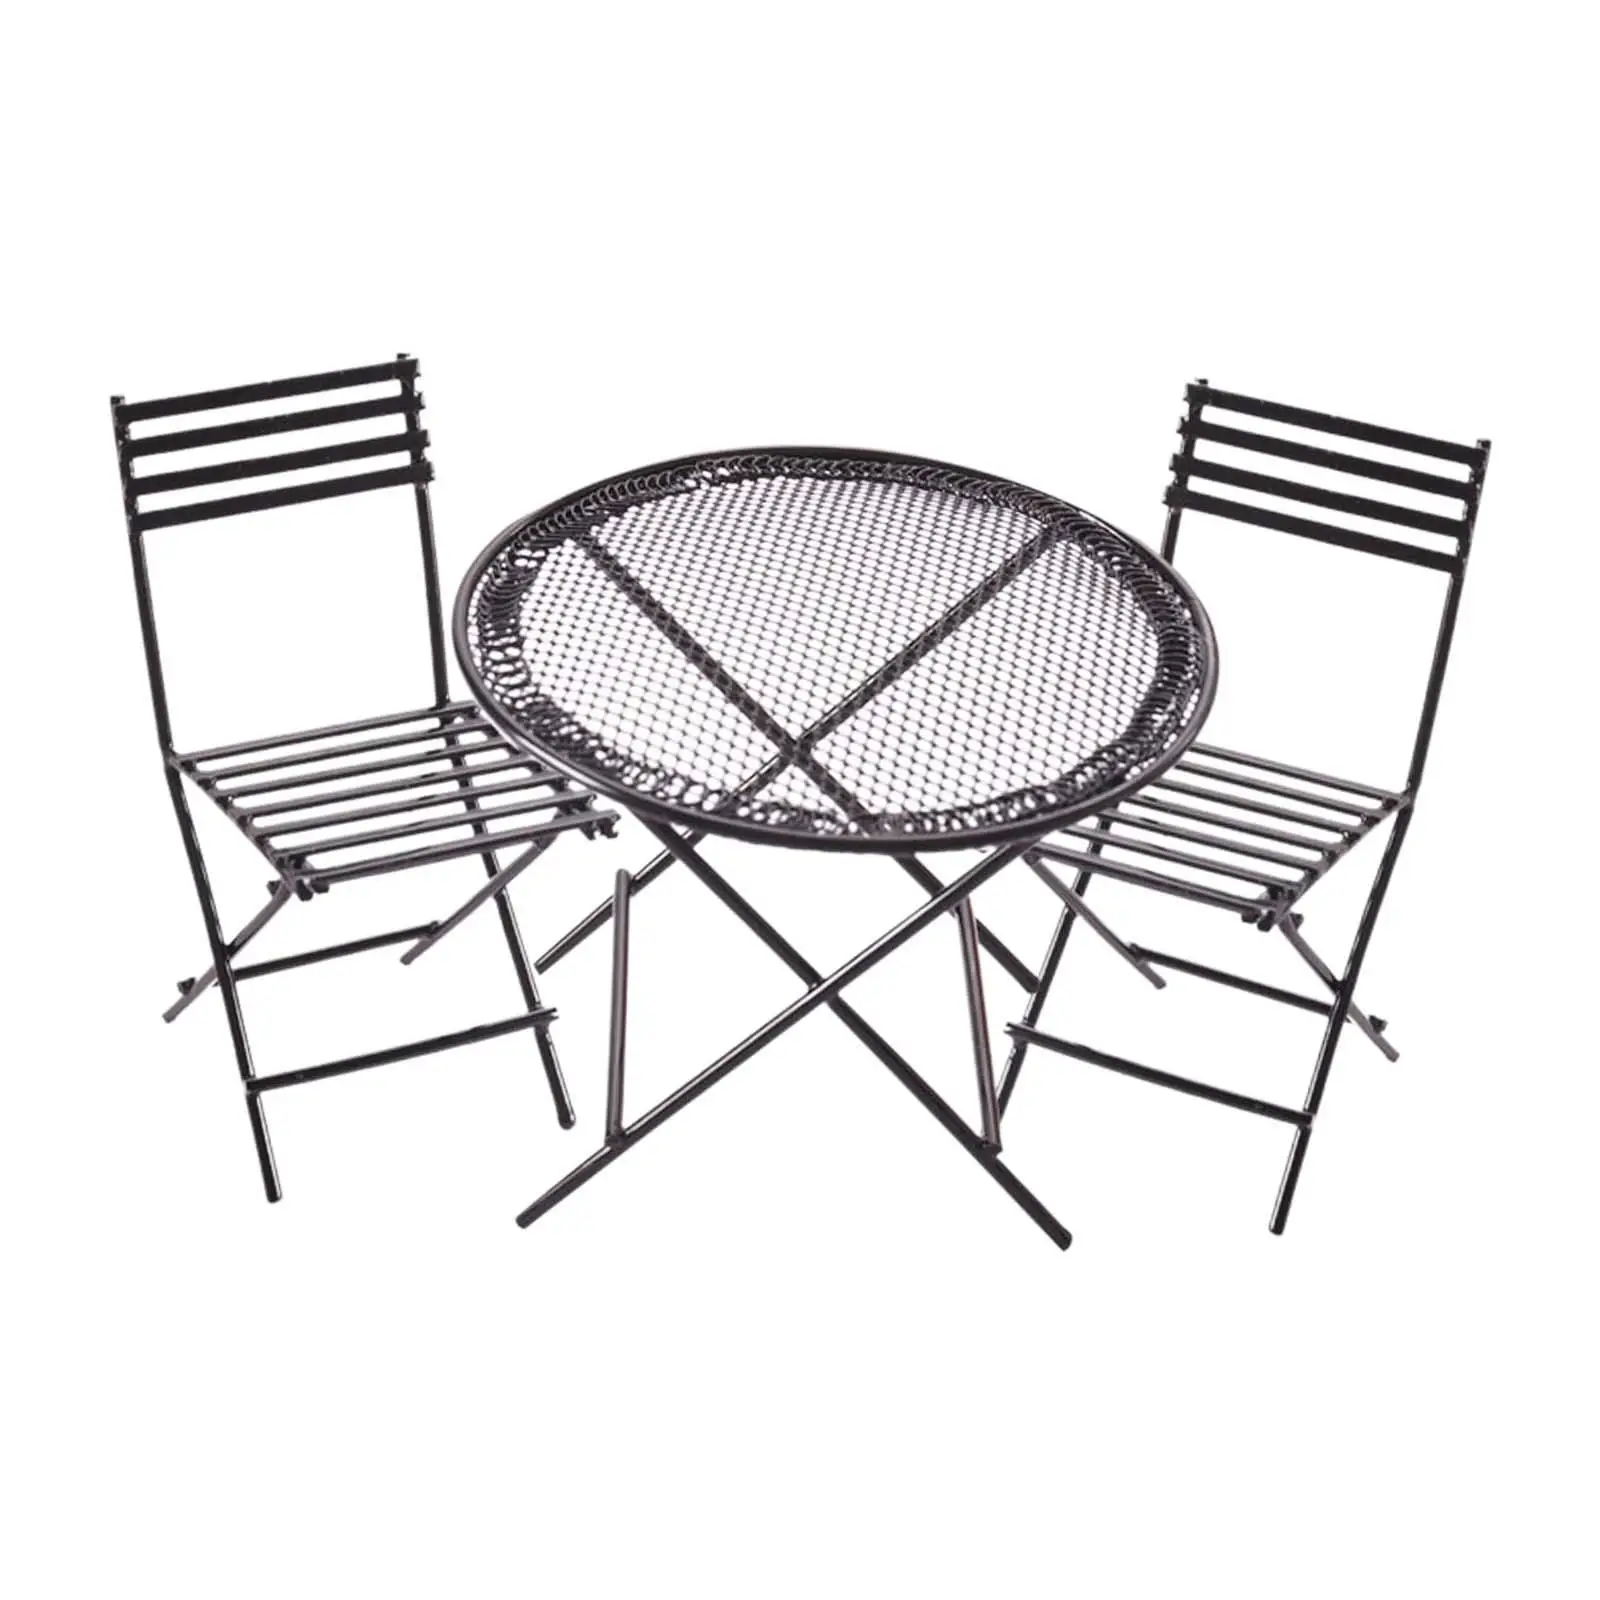 Miniatures Dolls House Garden Furniture, Wrought Iron Patio Table Chairs for 1/12 Dollhouse